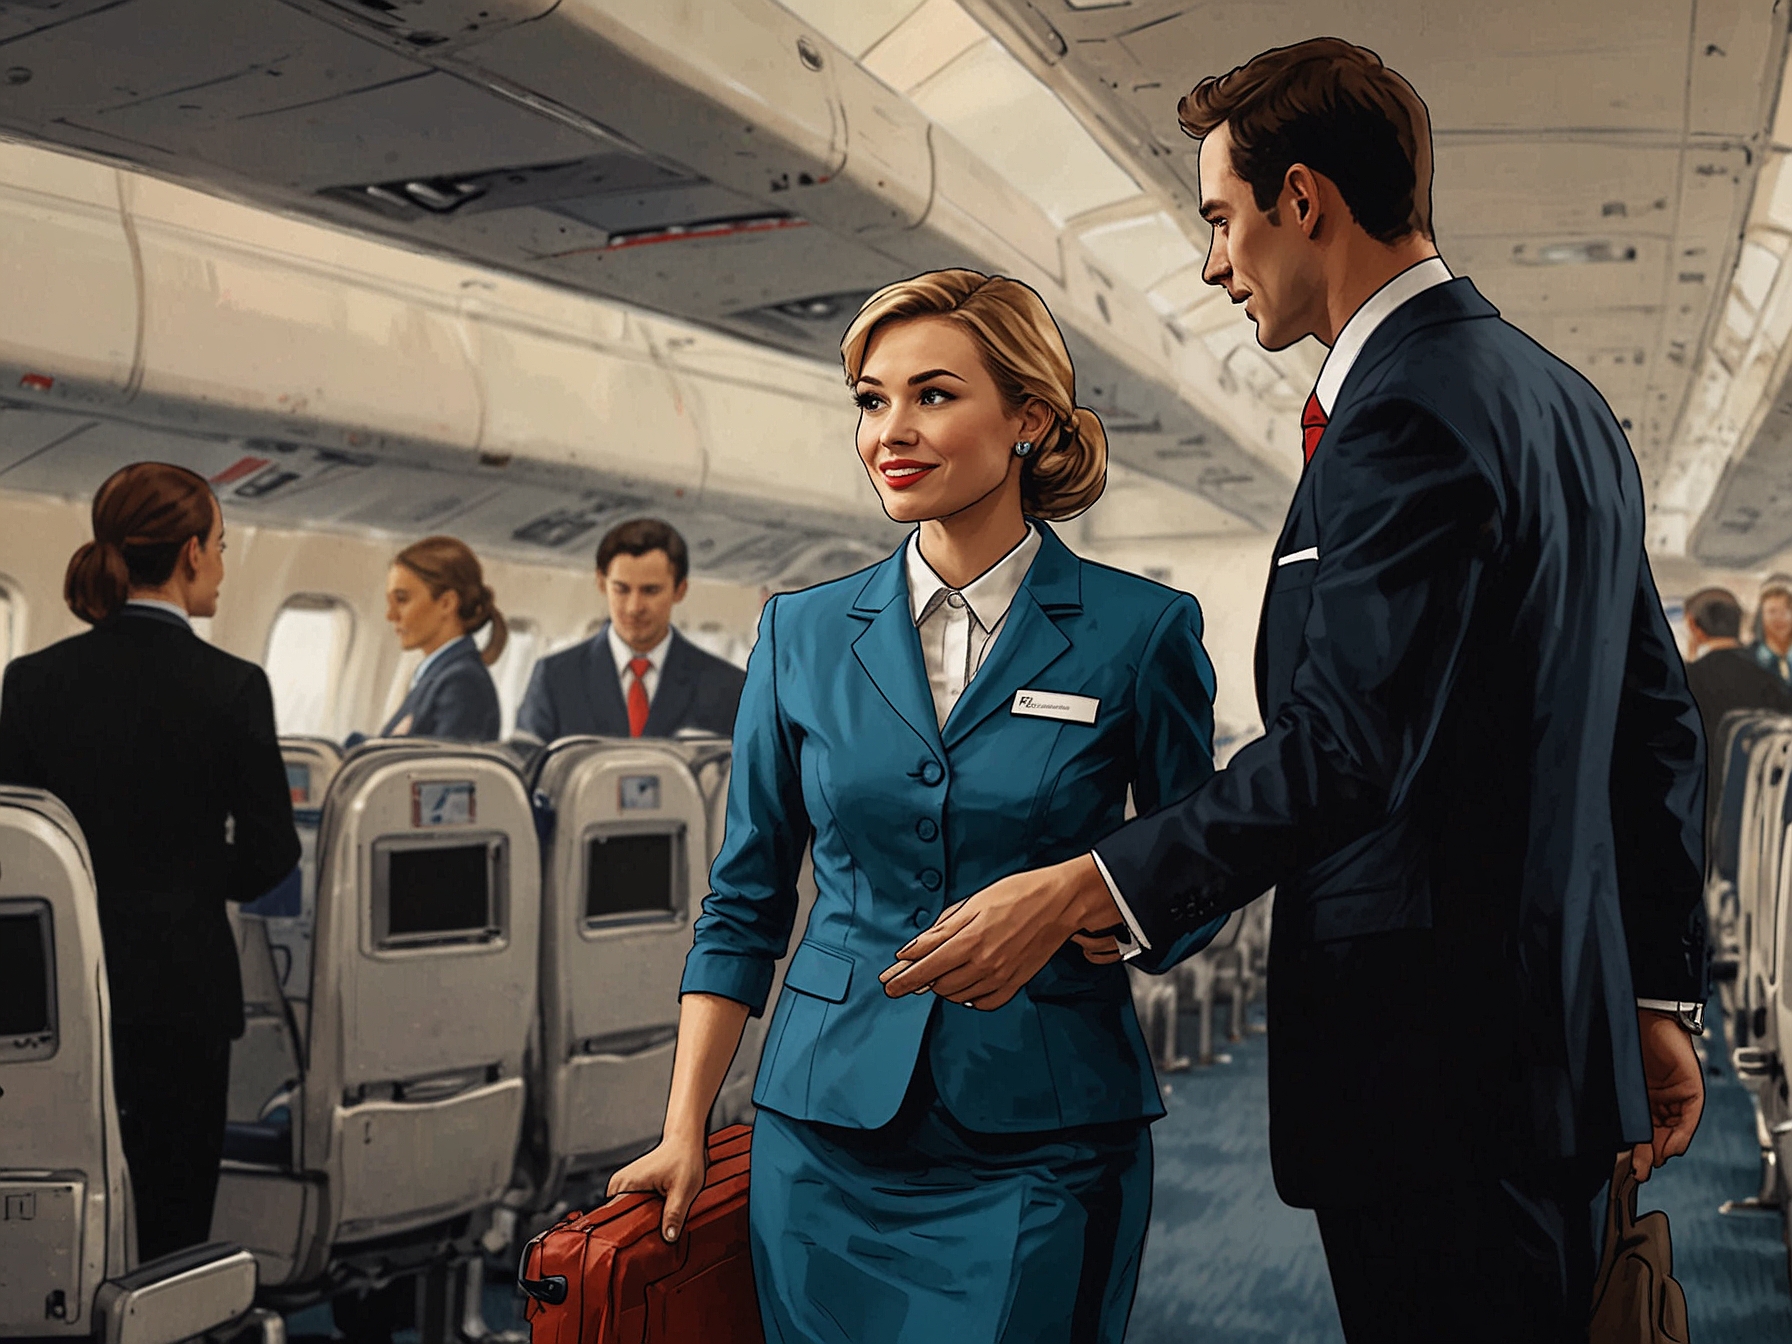 A flight attendant warmly greets passengers as they board the airplane, evaluating each one briefly. This initial interaction helps identify any potential security threats or special assistance needs.